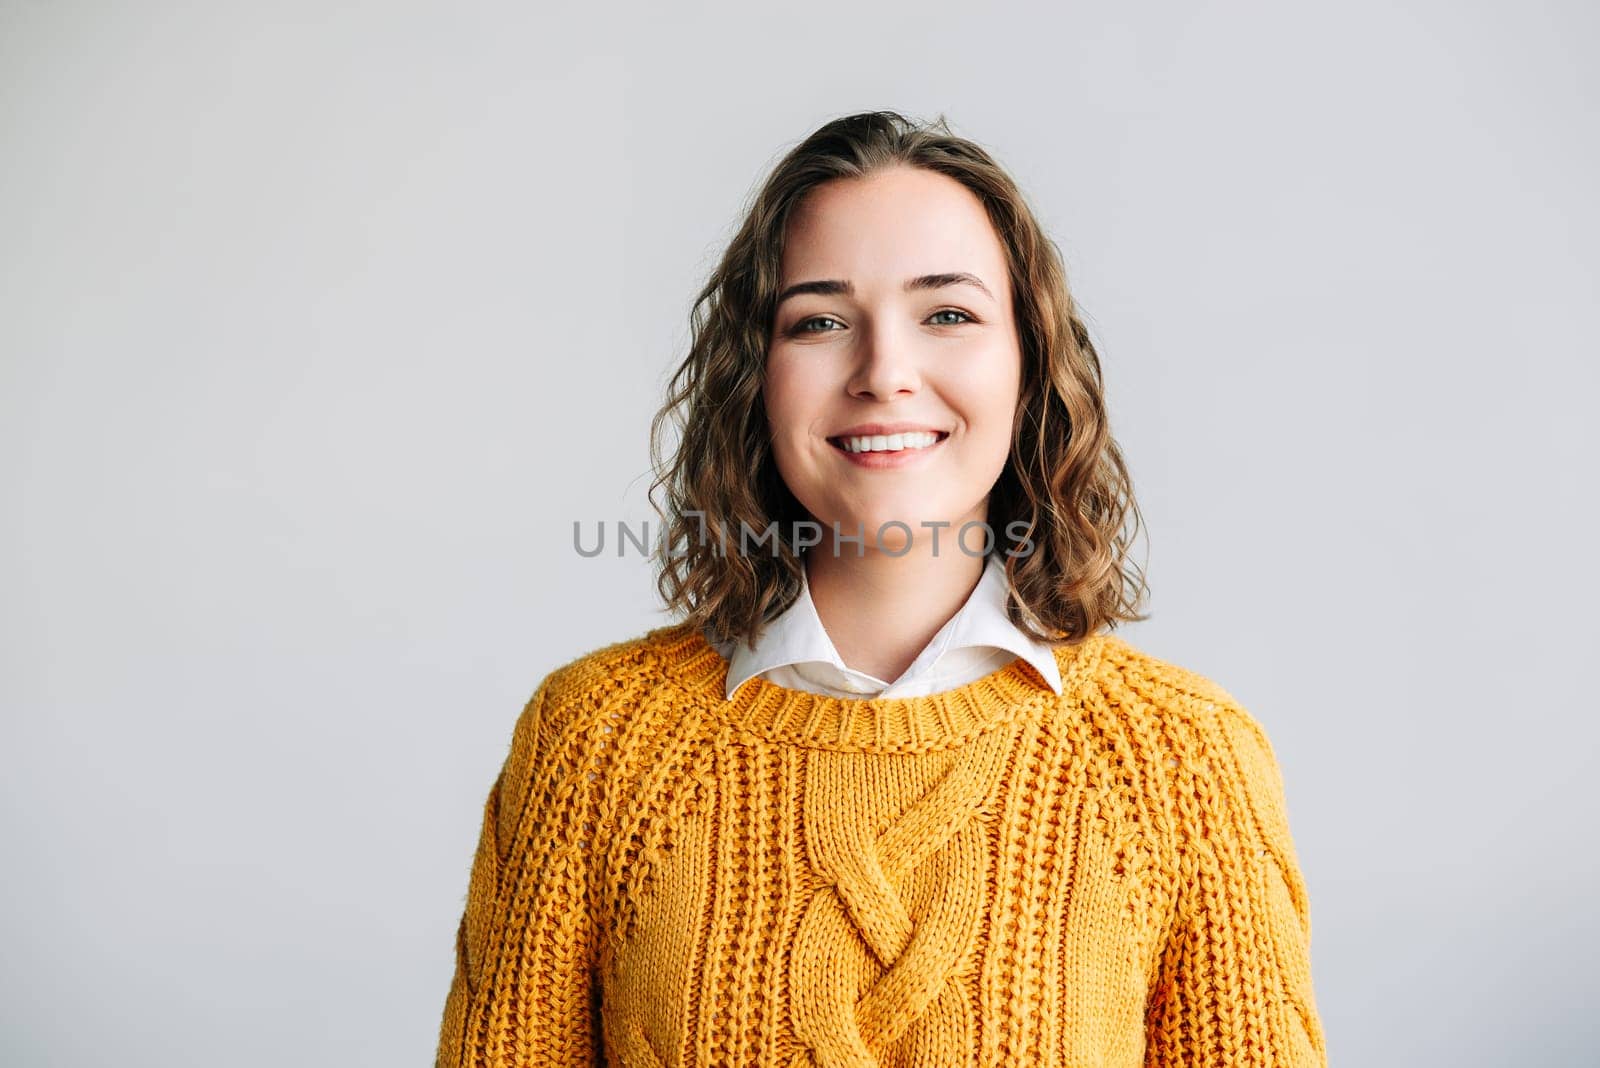 Cheerful Young Woman. Smiling, Positive, and Joyful. Happy Curly-haired Student Laughing, Looking at Camera Isolated on White Background Close-Up Headshot Portrait for Product and Service Advertising